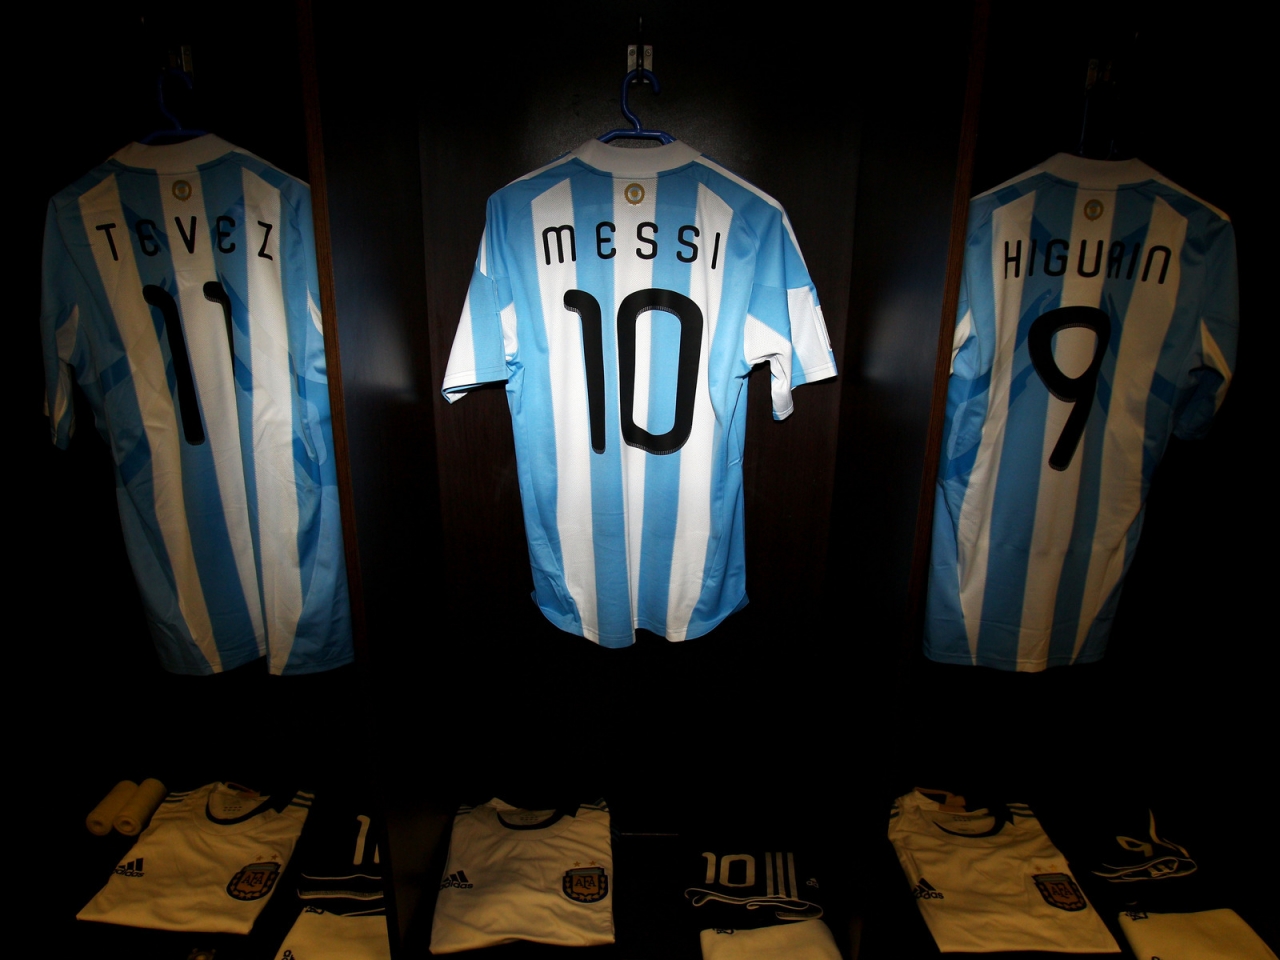 Tshirt of Messi, Tevez and Higuain for 1280 x 960 resolution